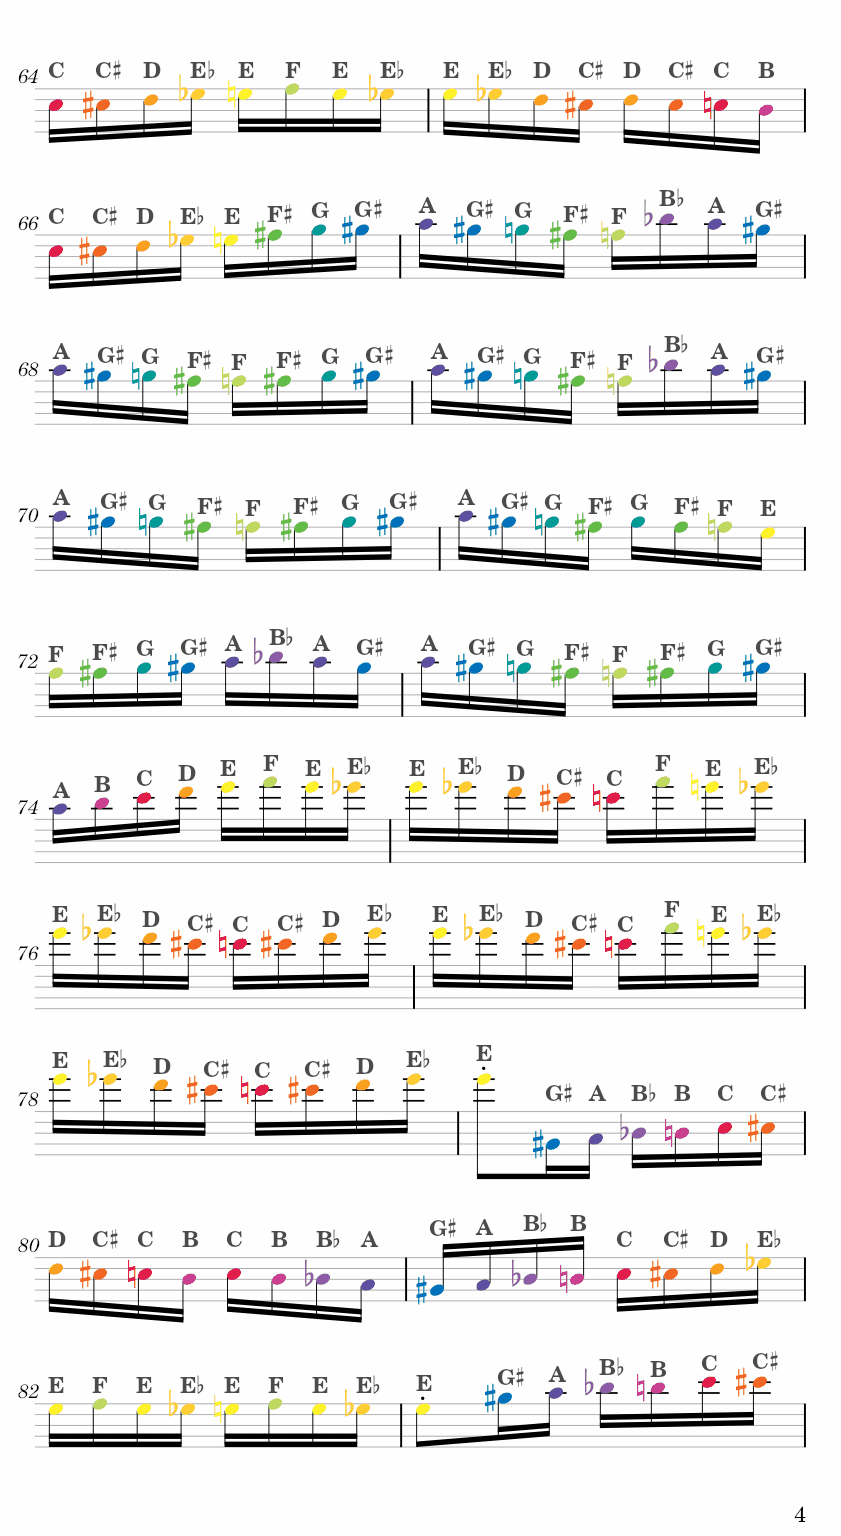 The Flight of the Bumble Bee - Korsakov Easy Sheets Music Free for piano, keyboard, flute, violin, sax, celllo 4